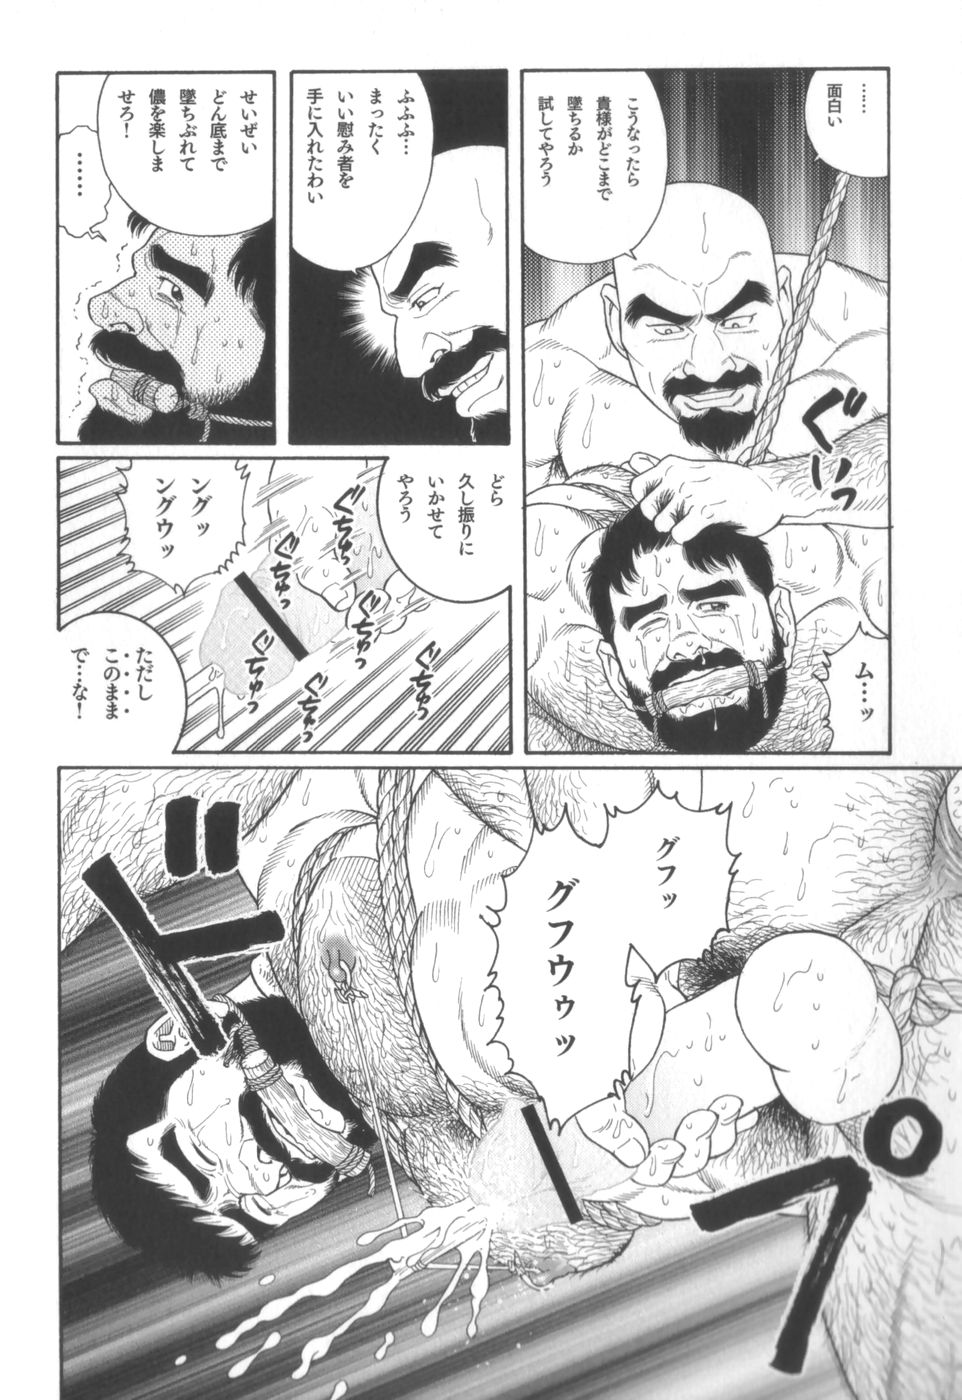 [Gengoroh Tagame] House of Brutes Vol 2 page 31 full